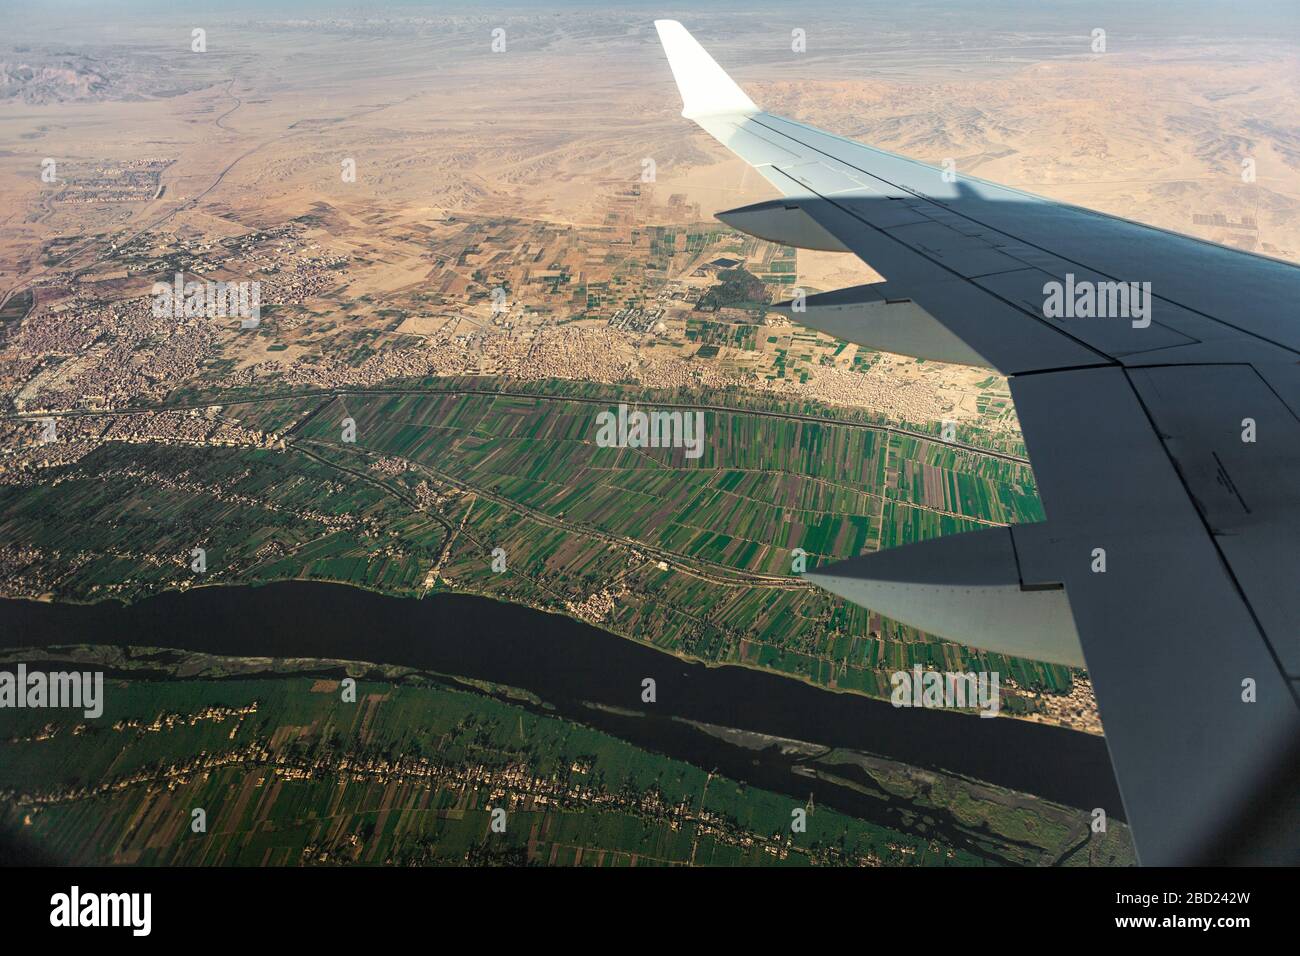 Aerial view of the River Nile and green vegetation along its banks in the Eastern Desert, near Luxor, Egypt Stock Photo